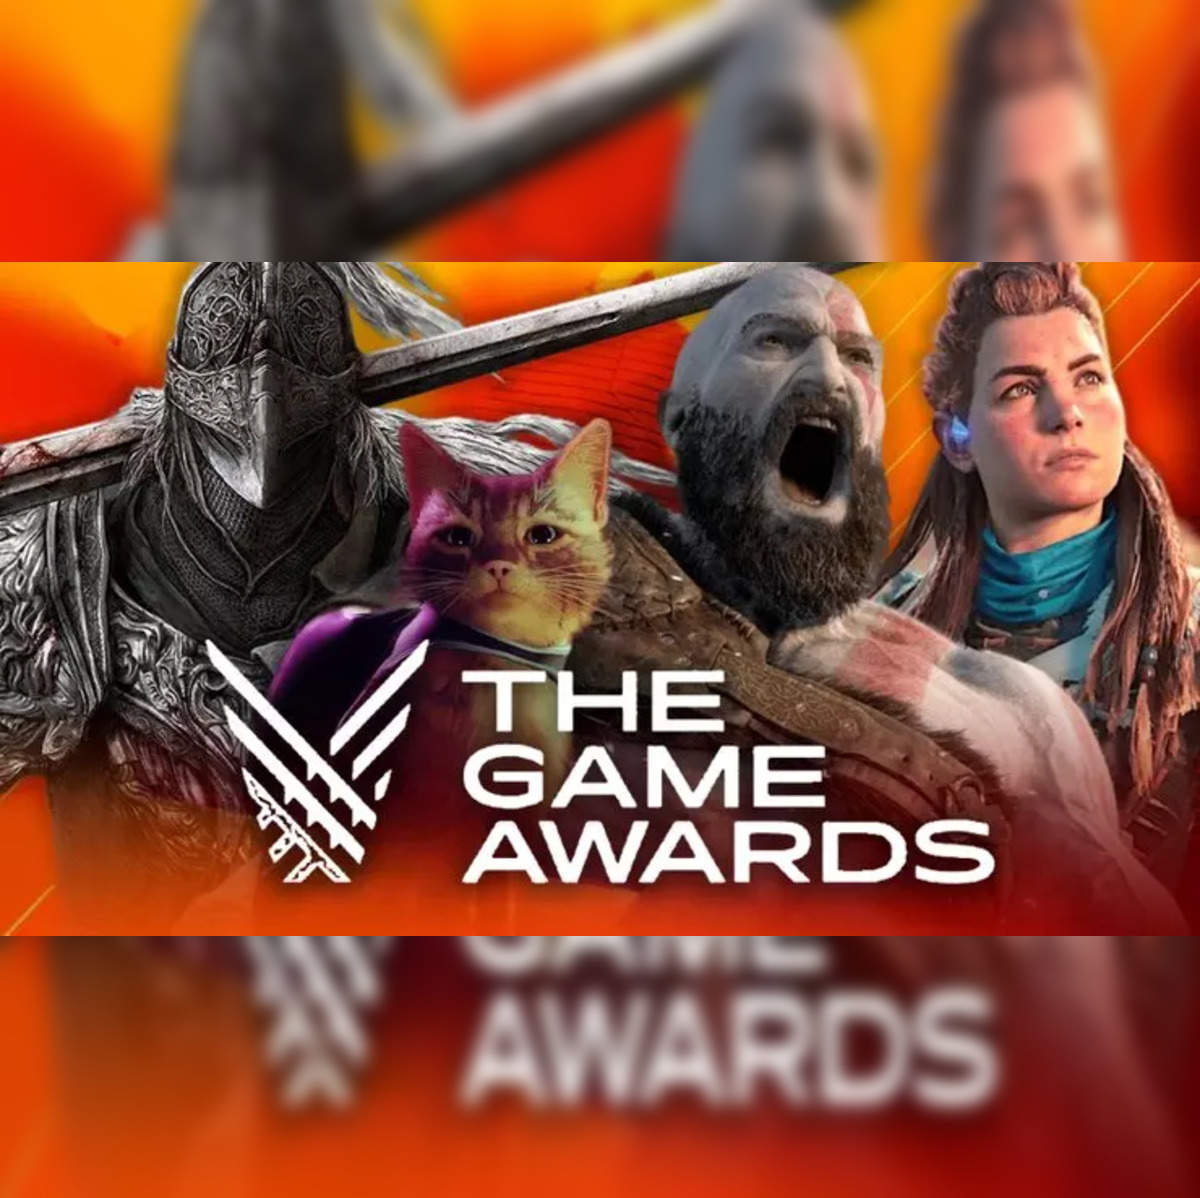 The Game Awards Winners for 2022